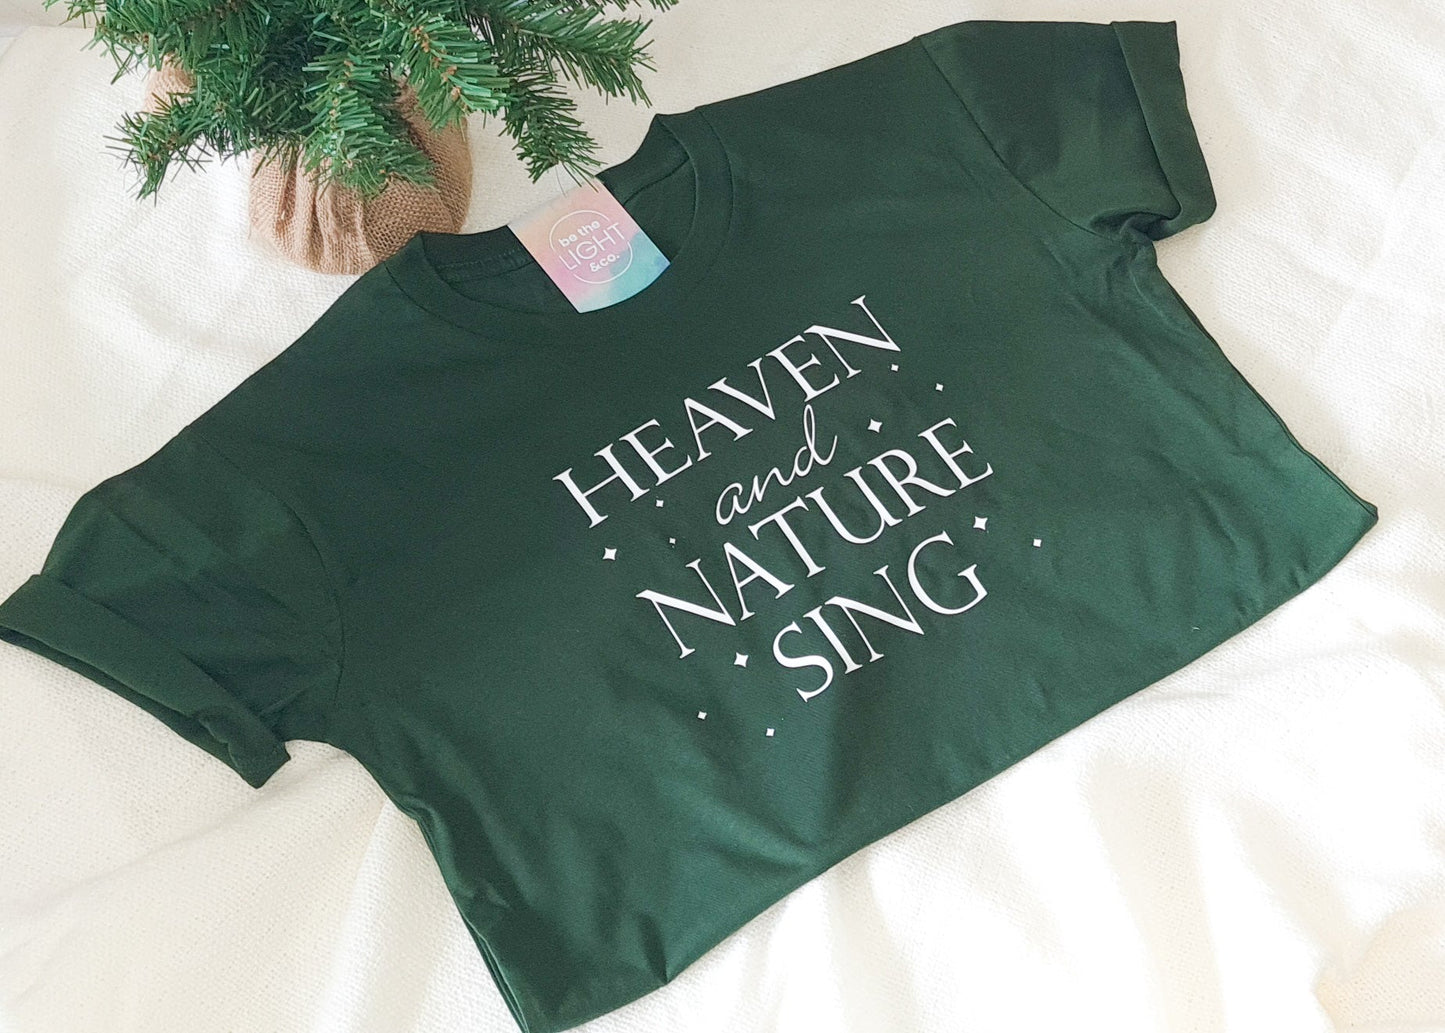 Heaven and Nature Sing Shirt